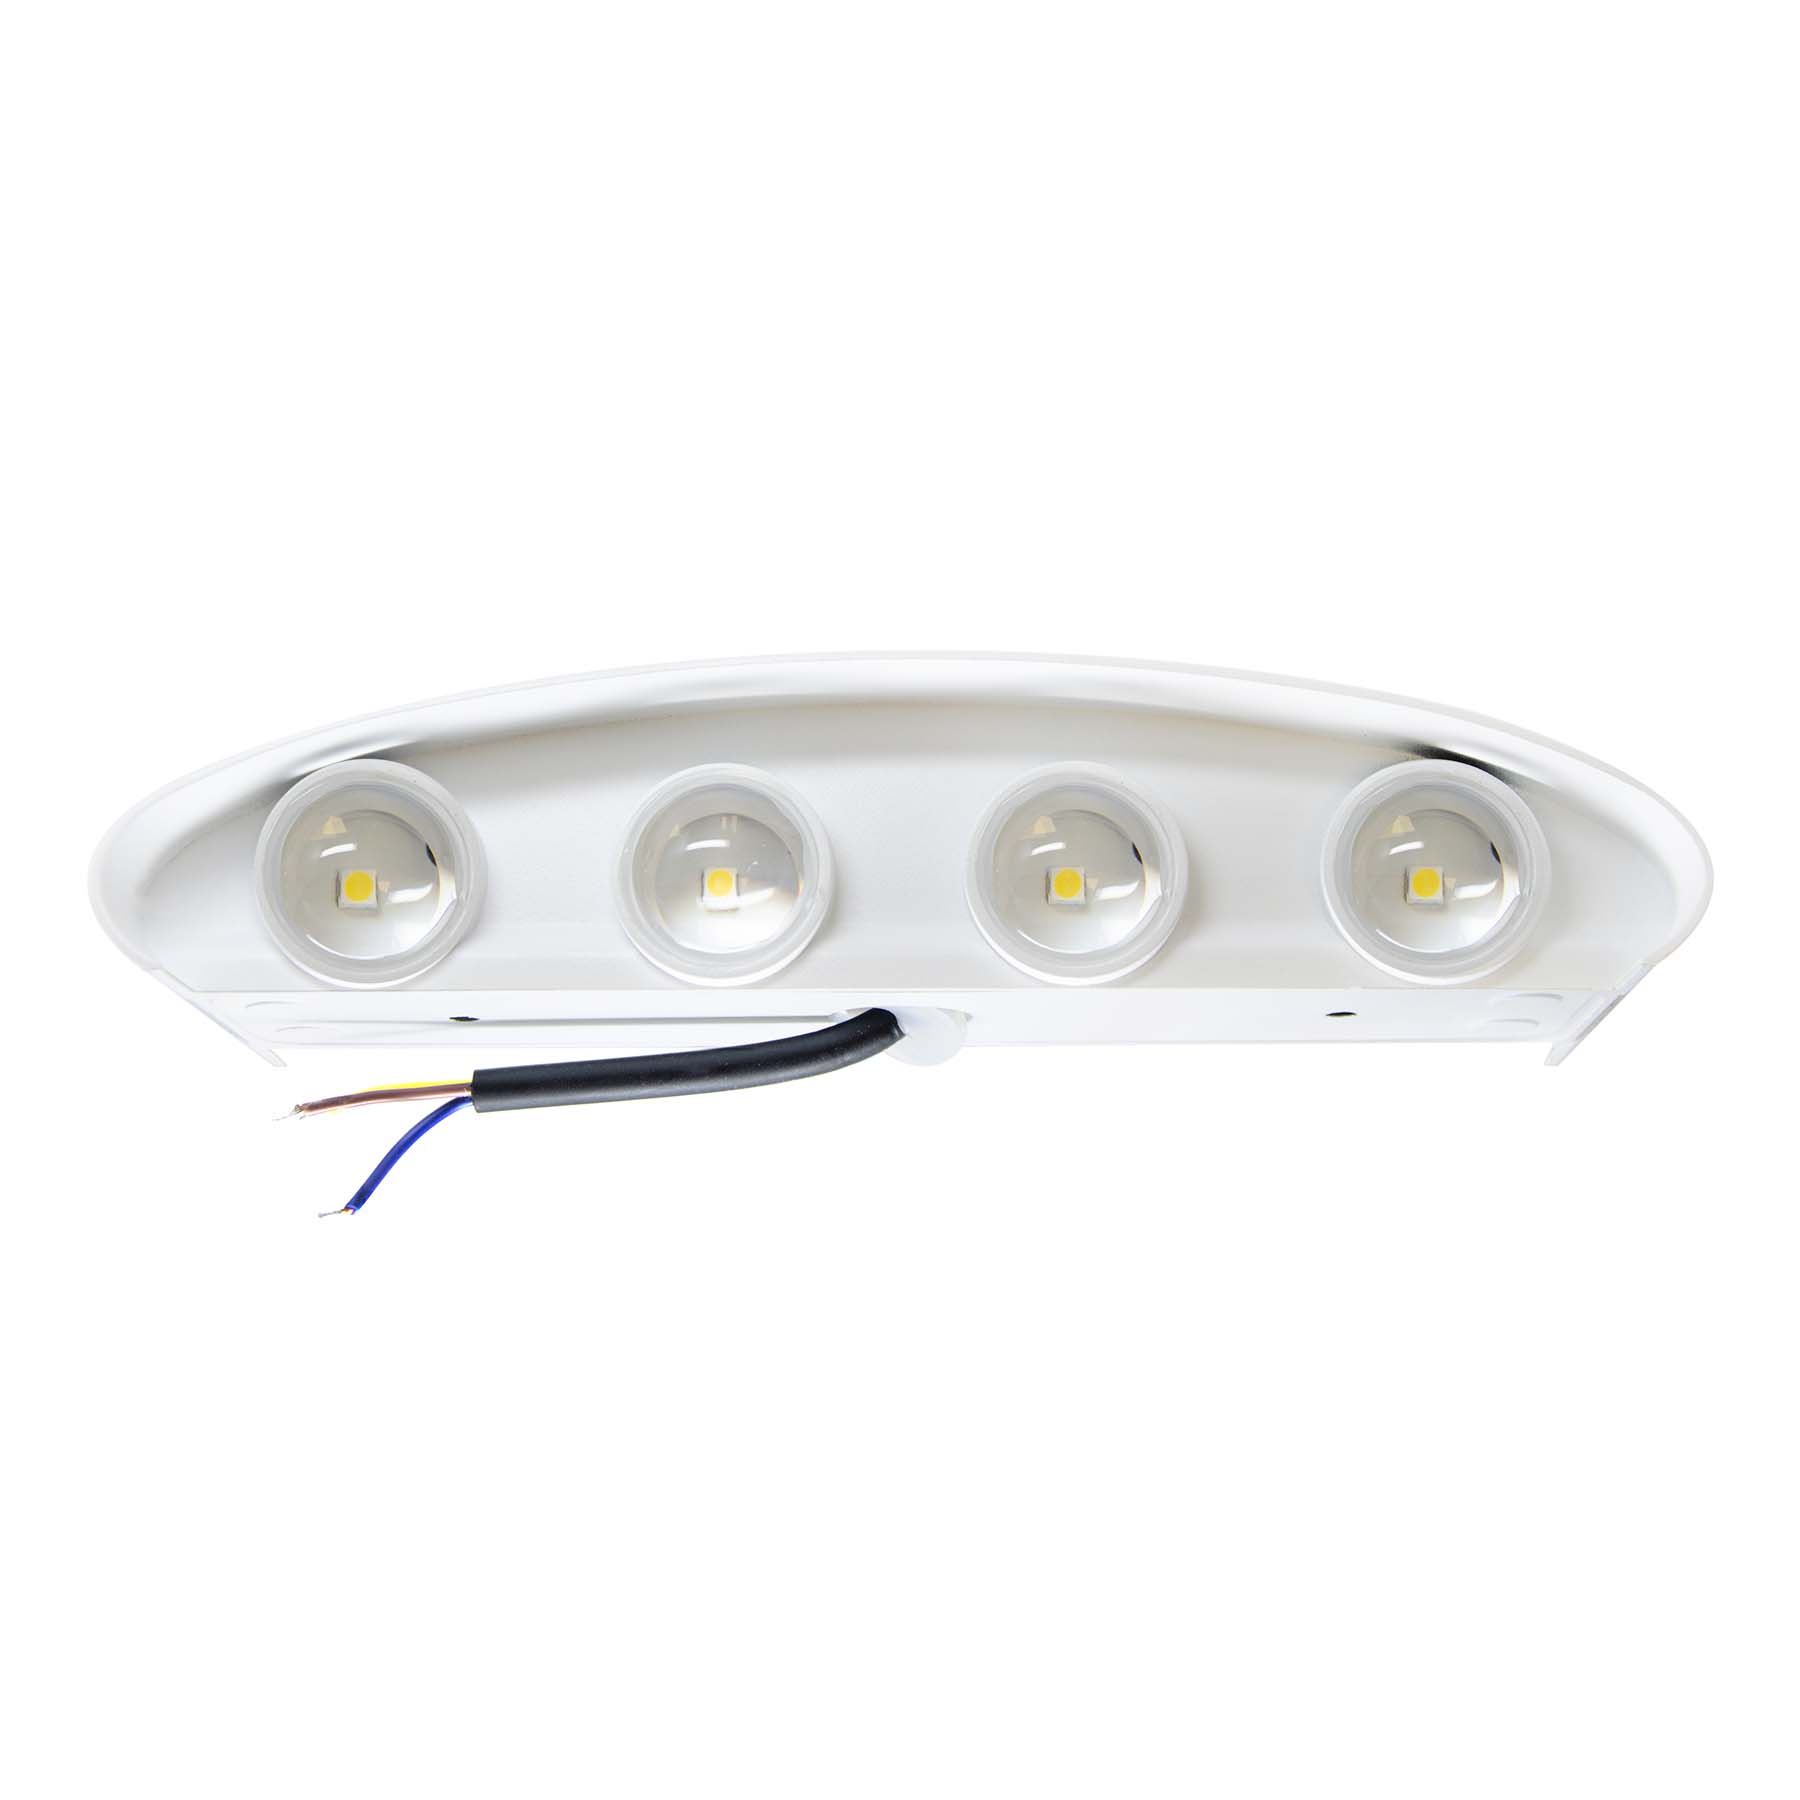 G.W.S. LED LED Wall Lights 8W White Up and Down LED Wall Light (WL-T8)